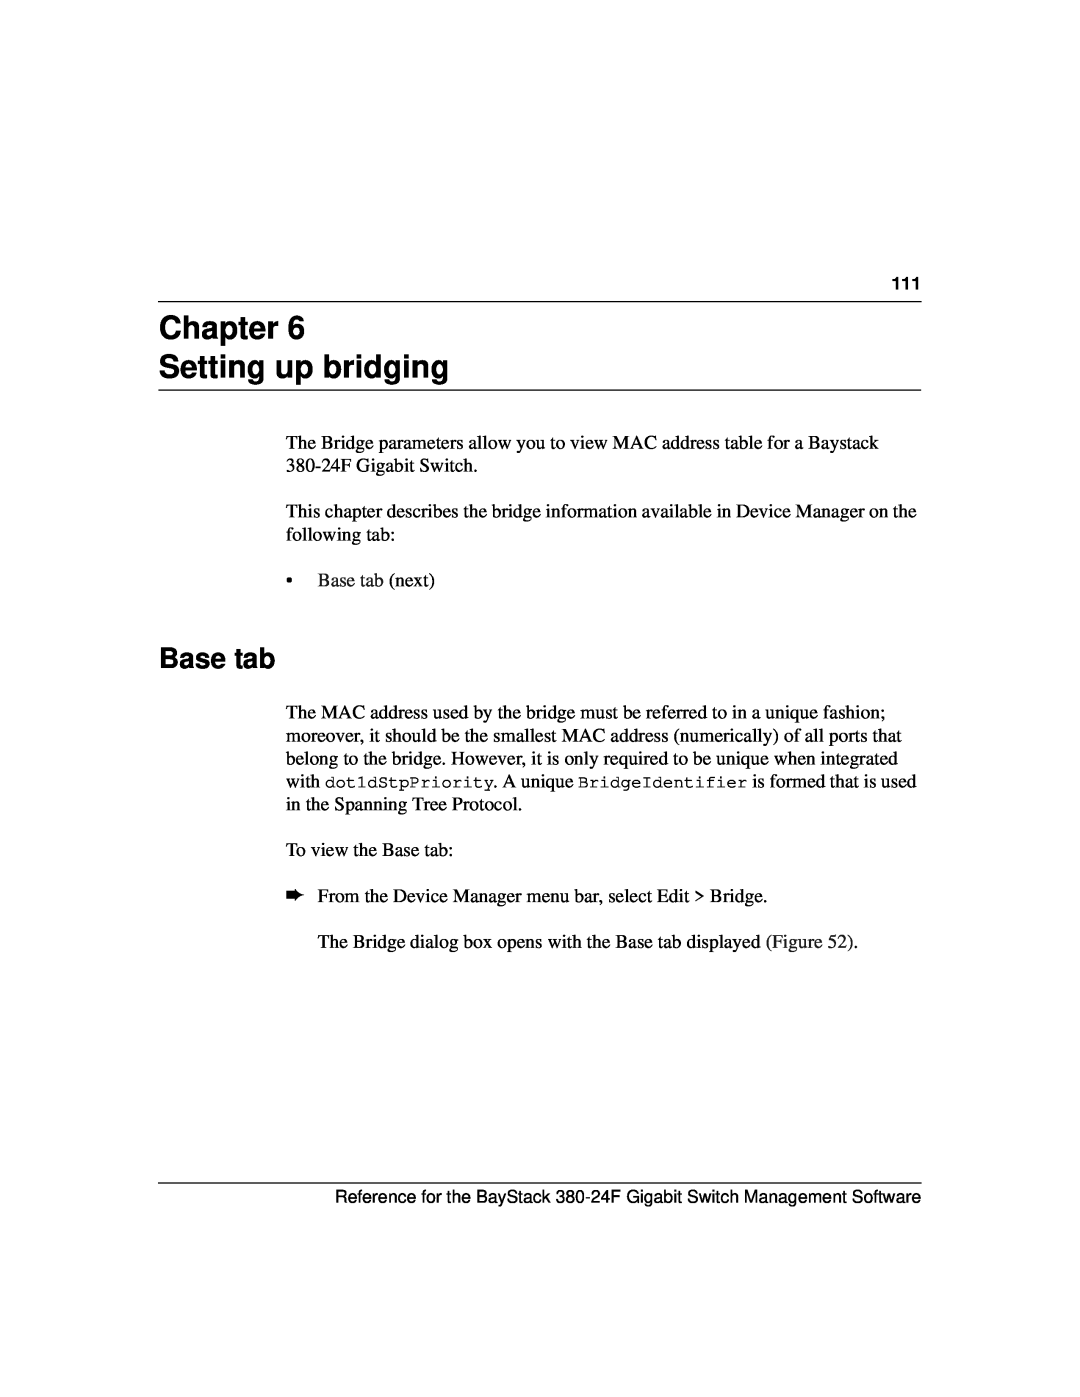 Nortel Networks 214393-A manual Chapter Setting up bridging, Base tab next 